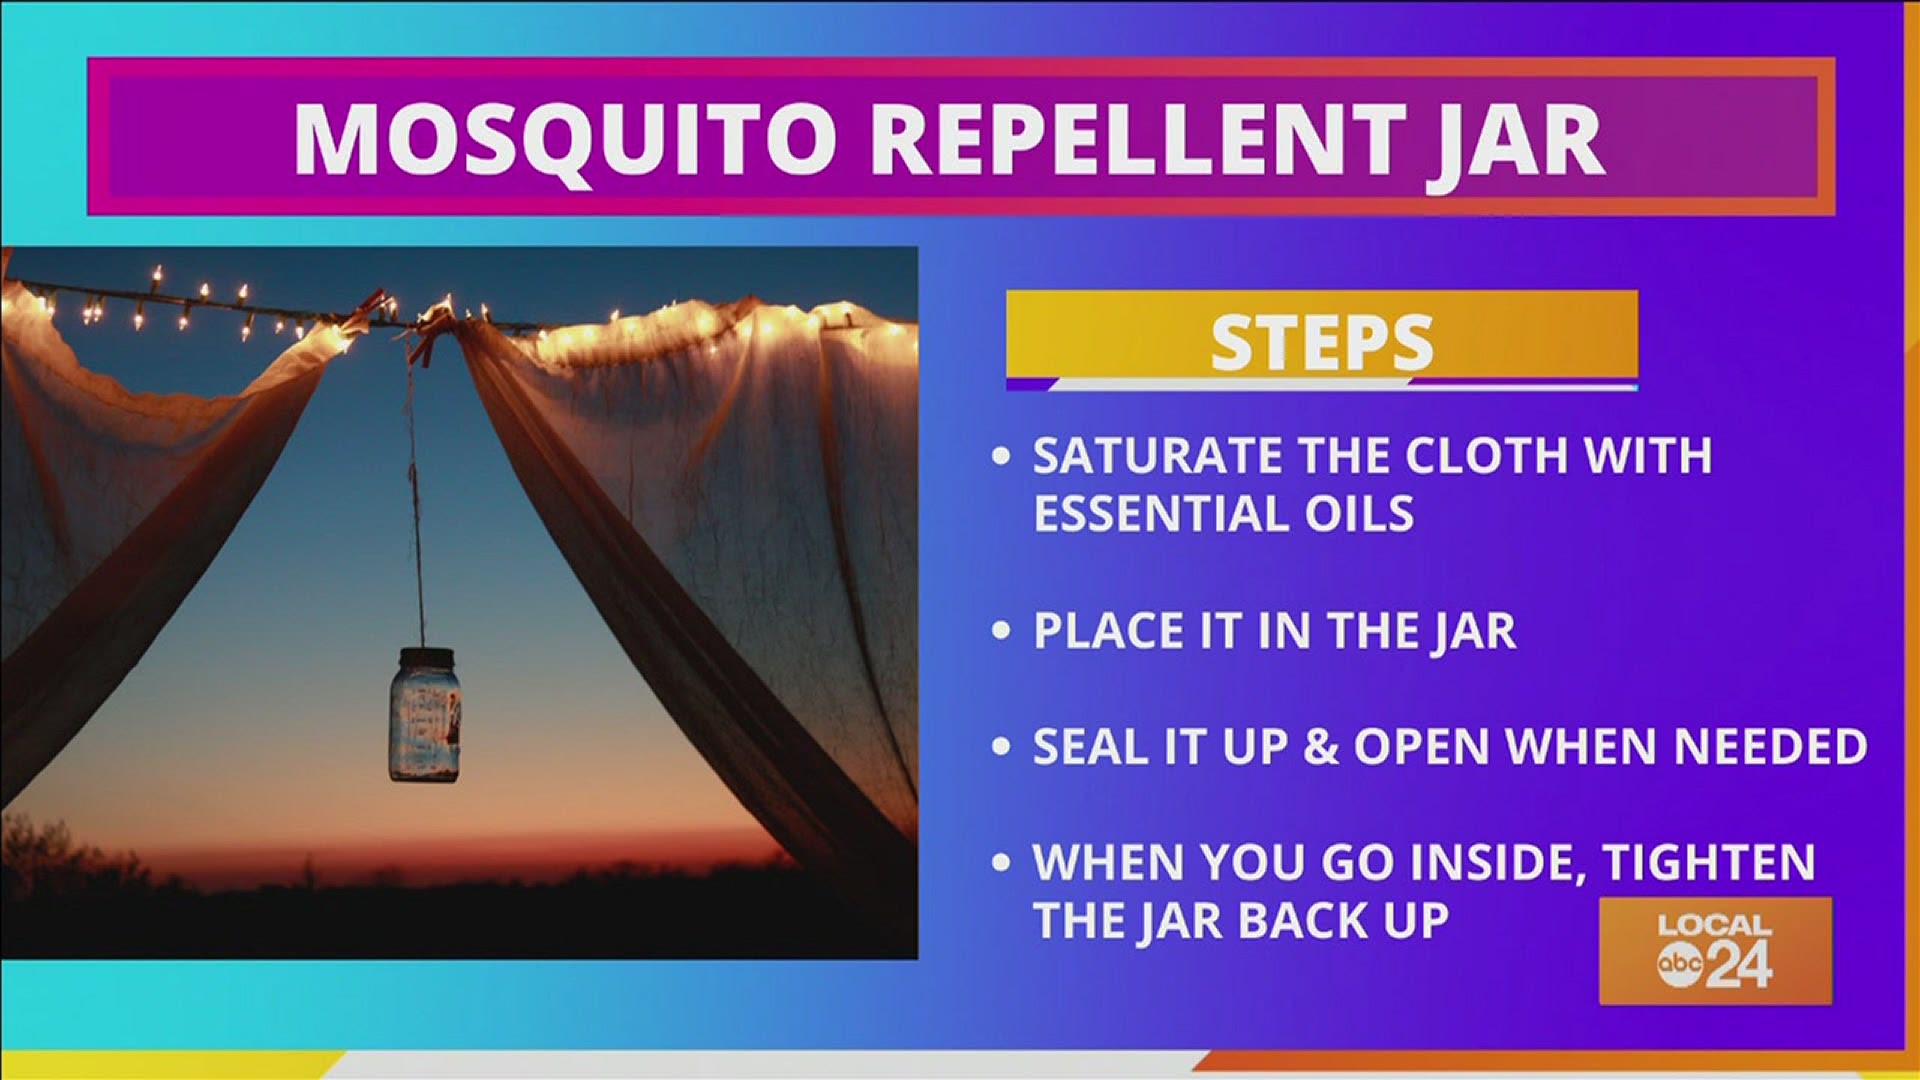 Hate mosquitos, but still want to protect the environment? In that case, check out these repellent recipes! Starring Sydney Neely on "The Shortcut!"